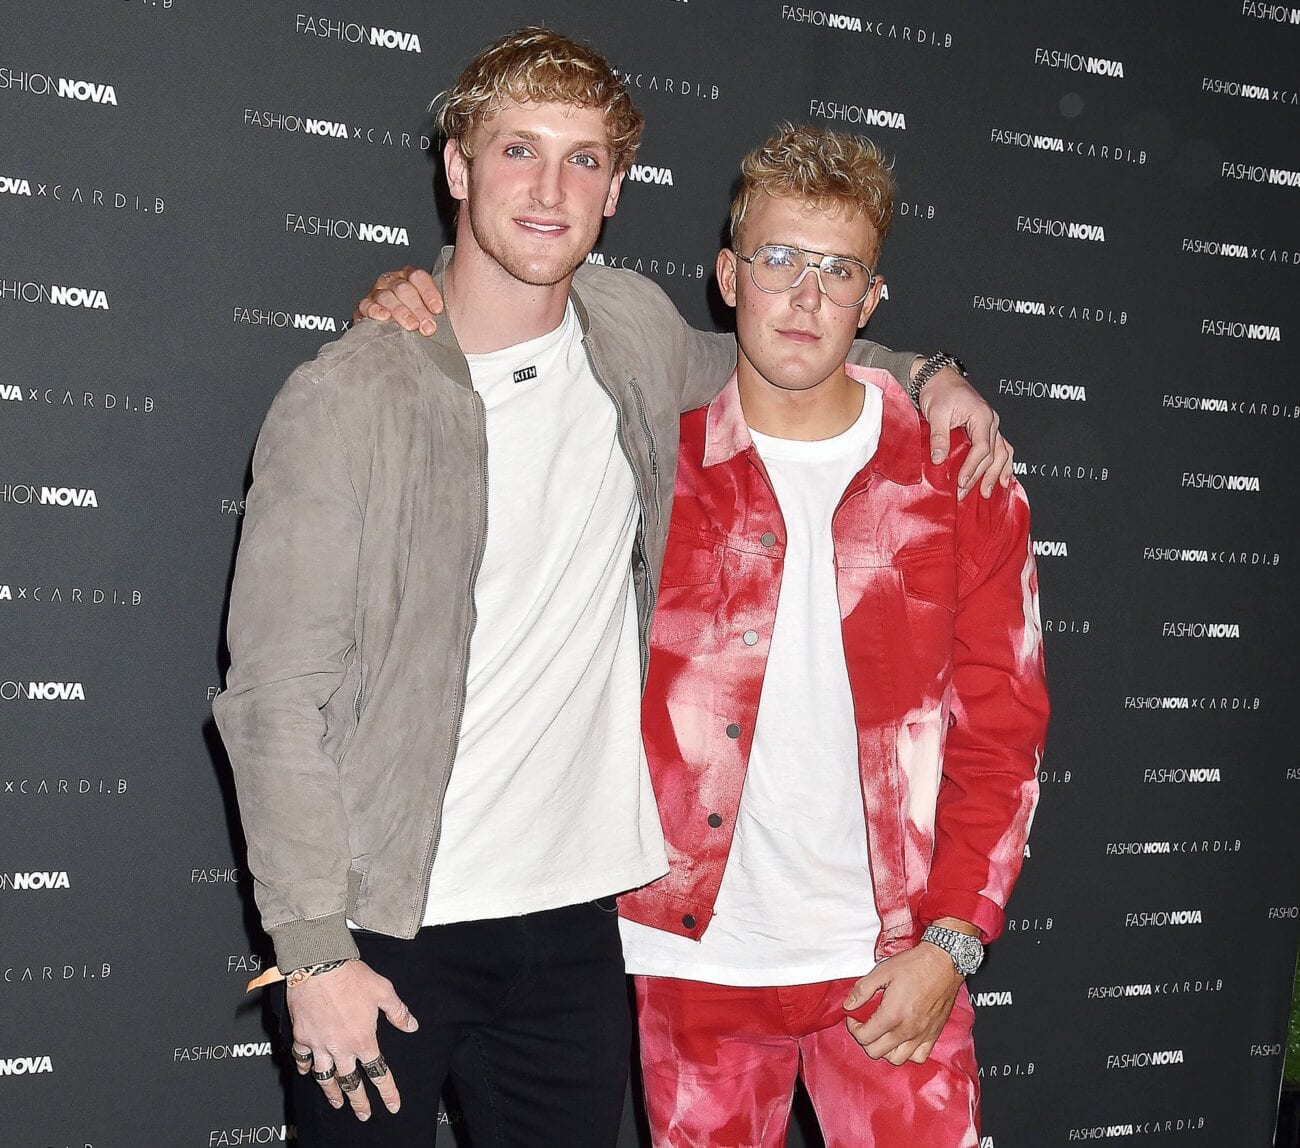 Why do Logan and Jake Paul fight? The Paul brothers recently revealed why they decided to step into the ring. Check out who they're fighting next!